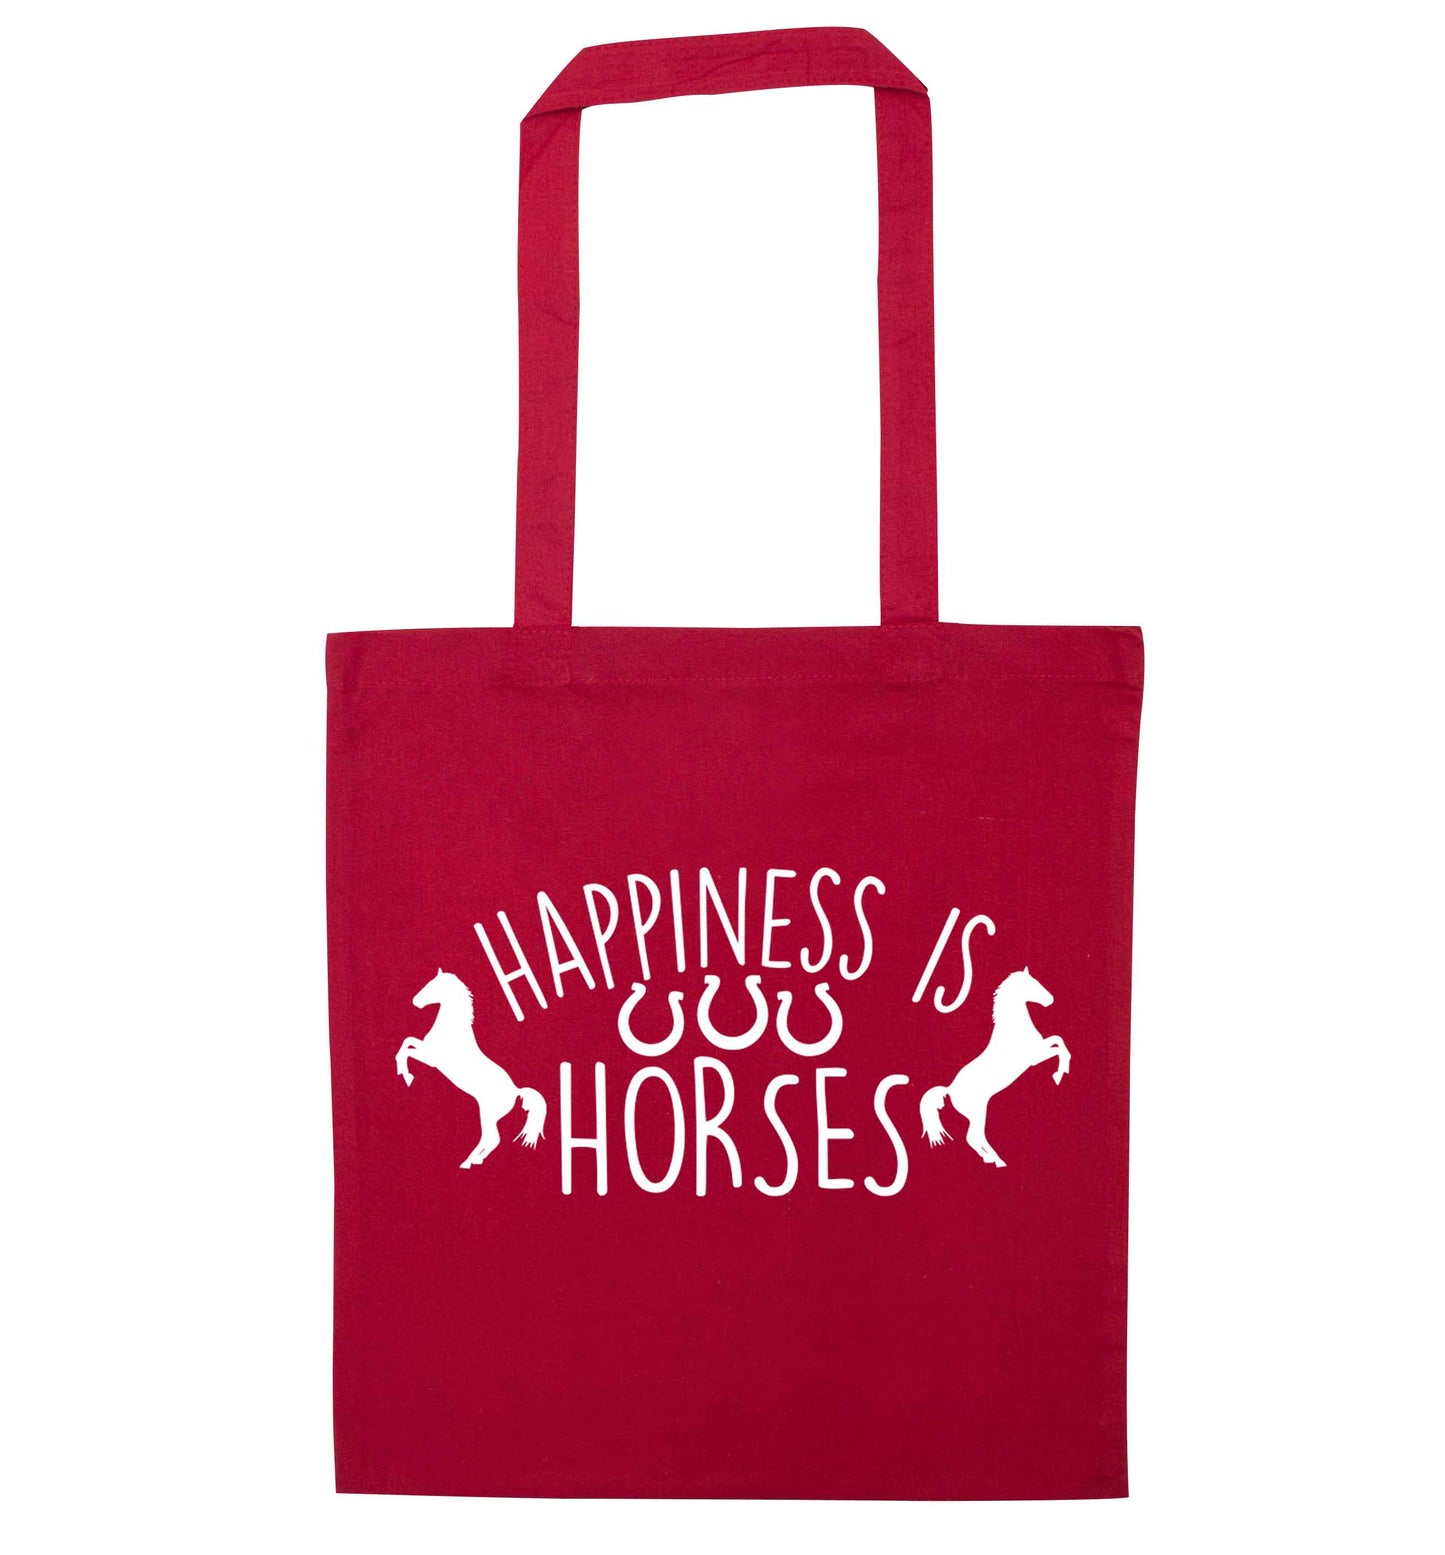 Happiness is horses red tote bag